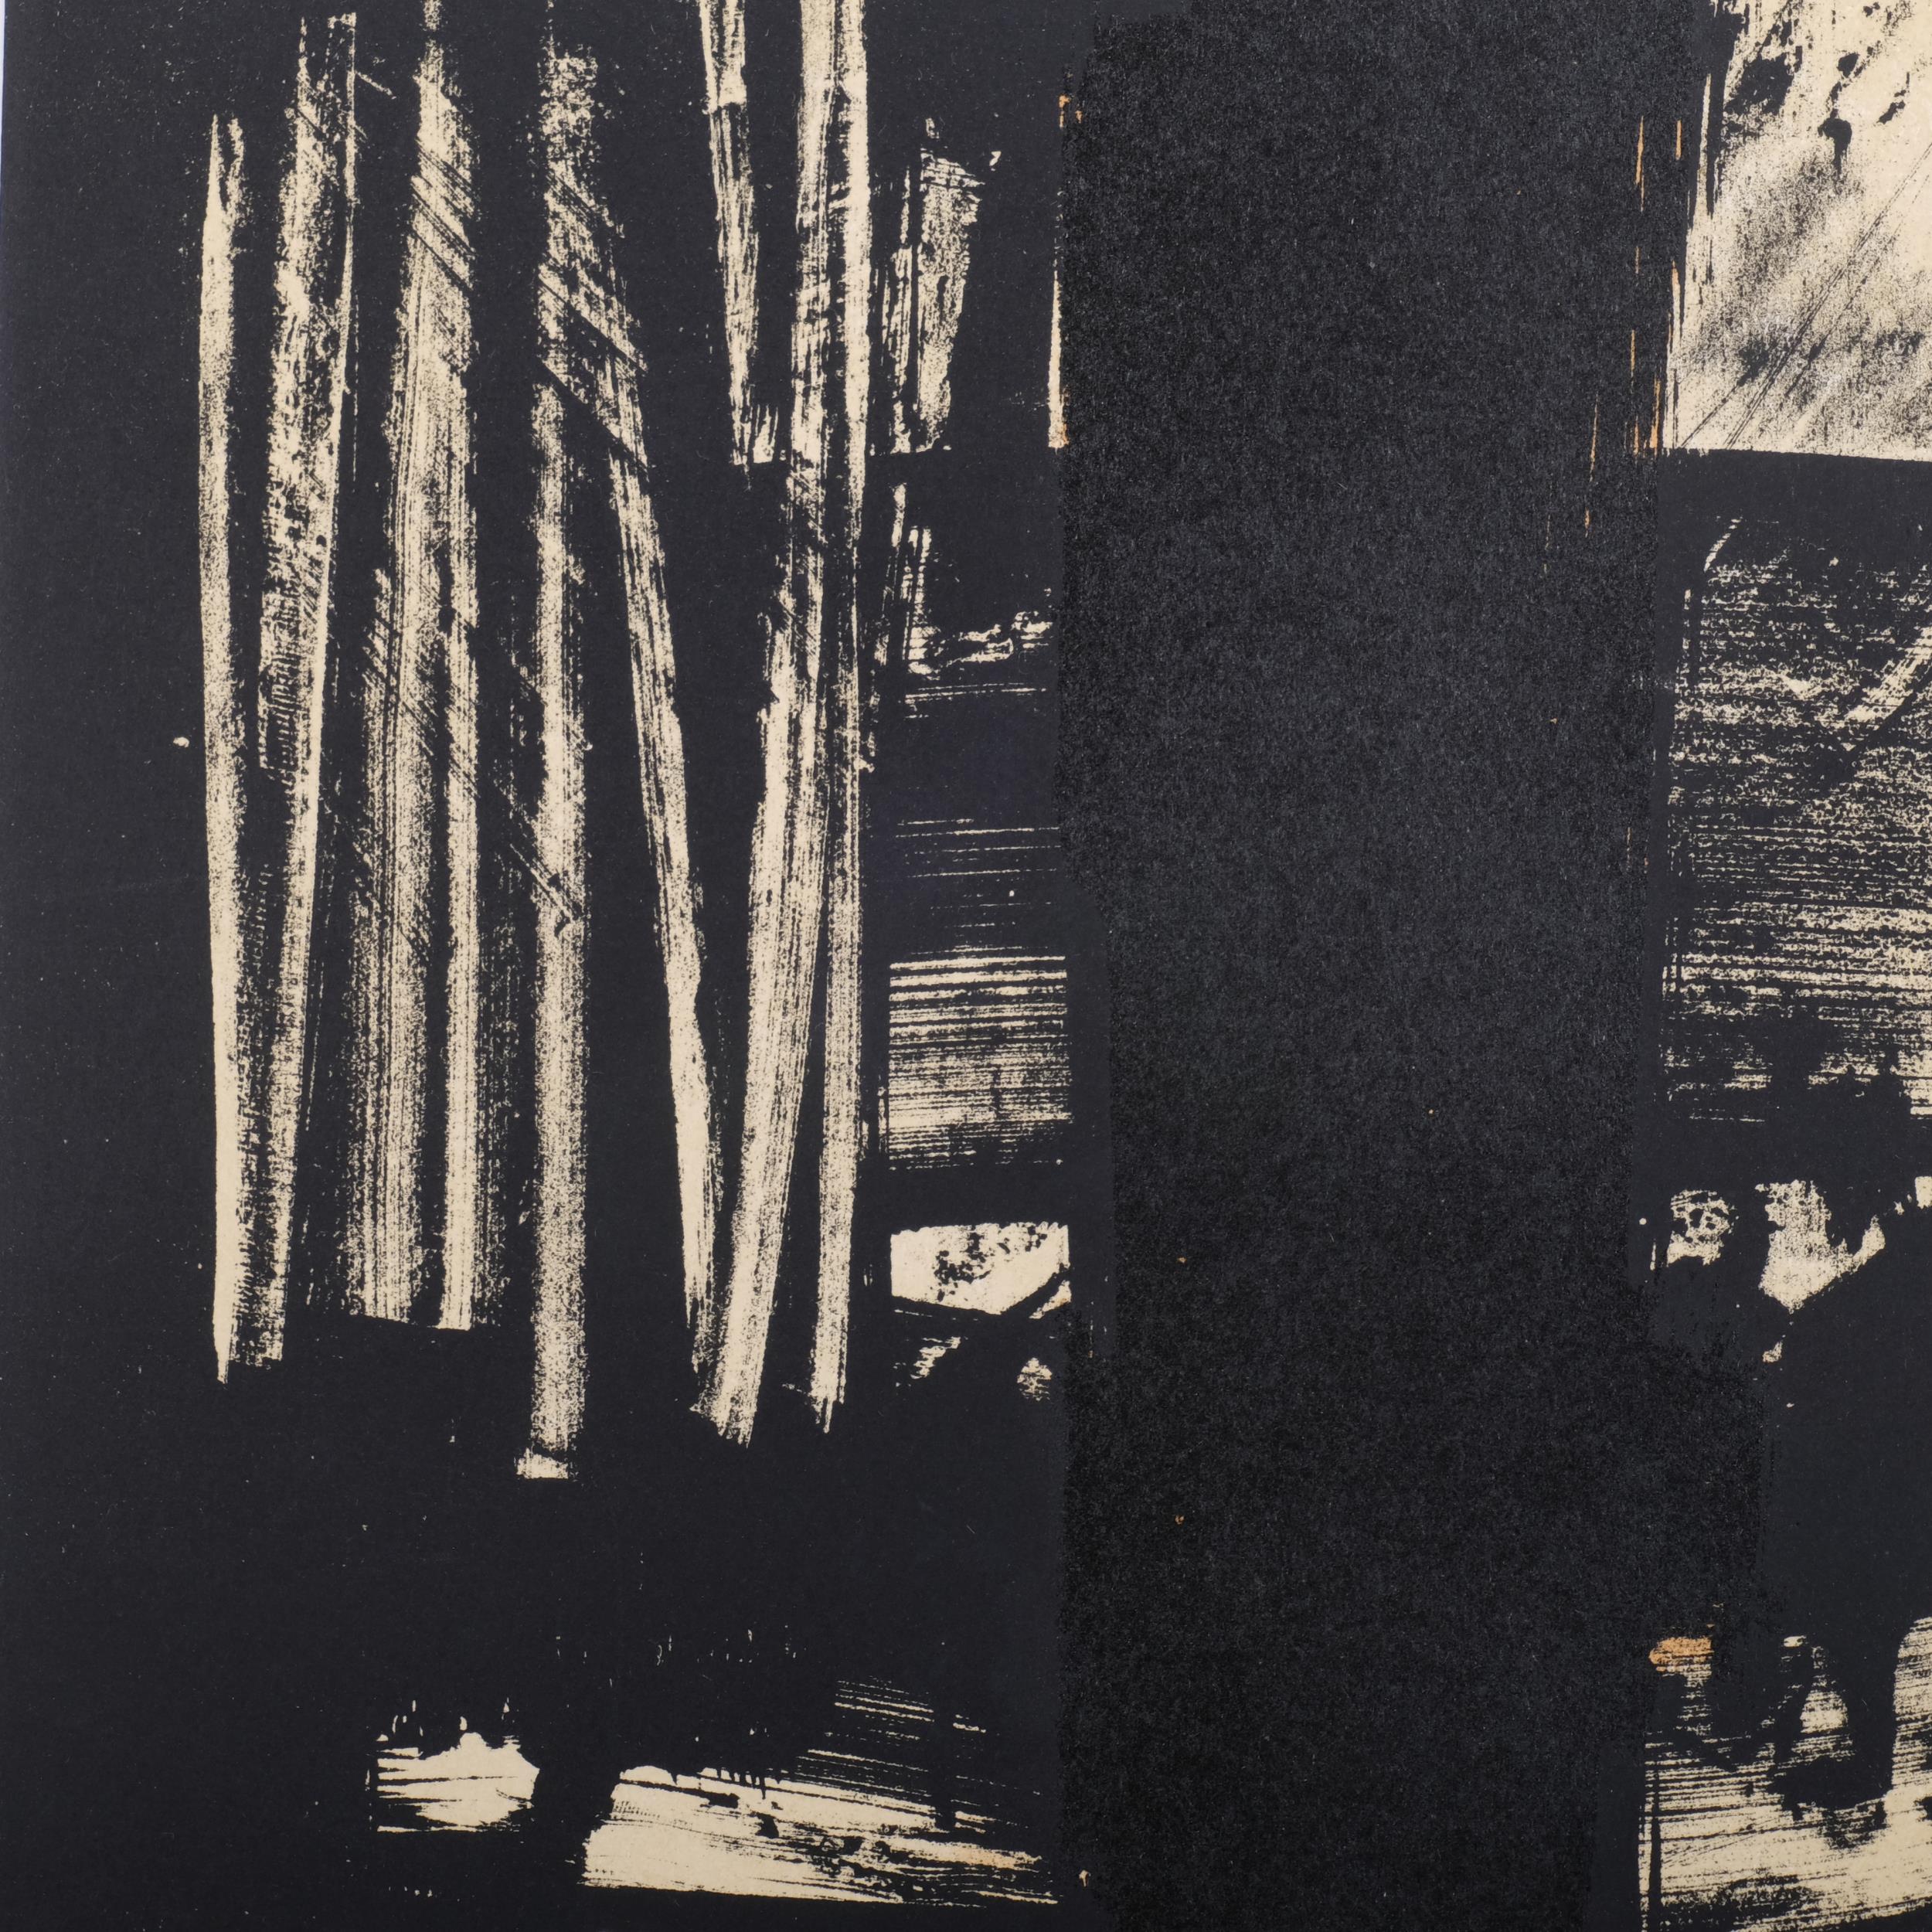 Pierre Soulages, abstract, lithograph no. 9, issued XX Siecle 1959, 30cm x 23cm, framed Good - Image 3 of 4